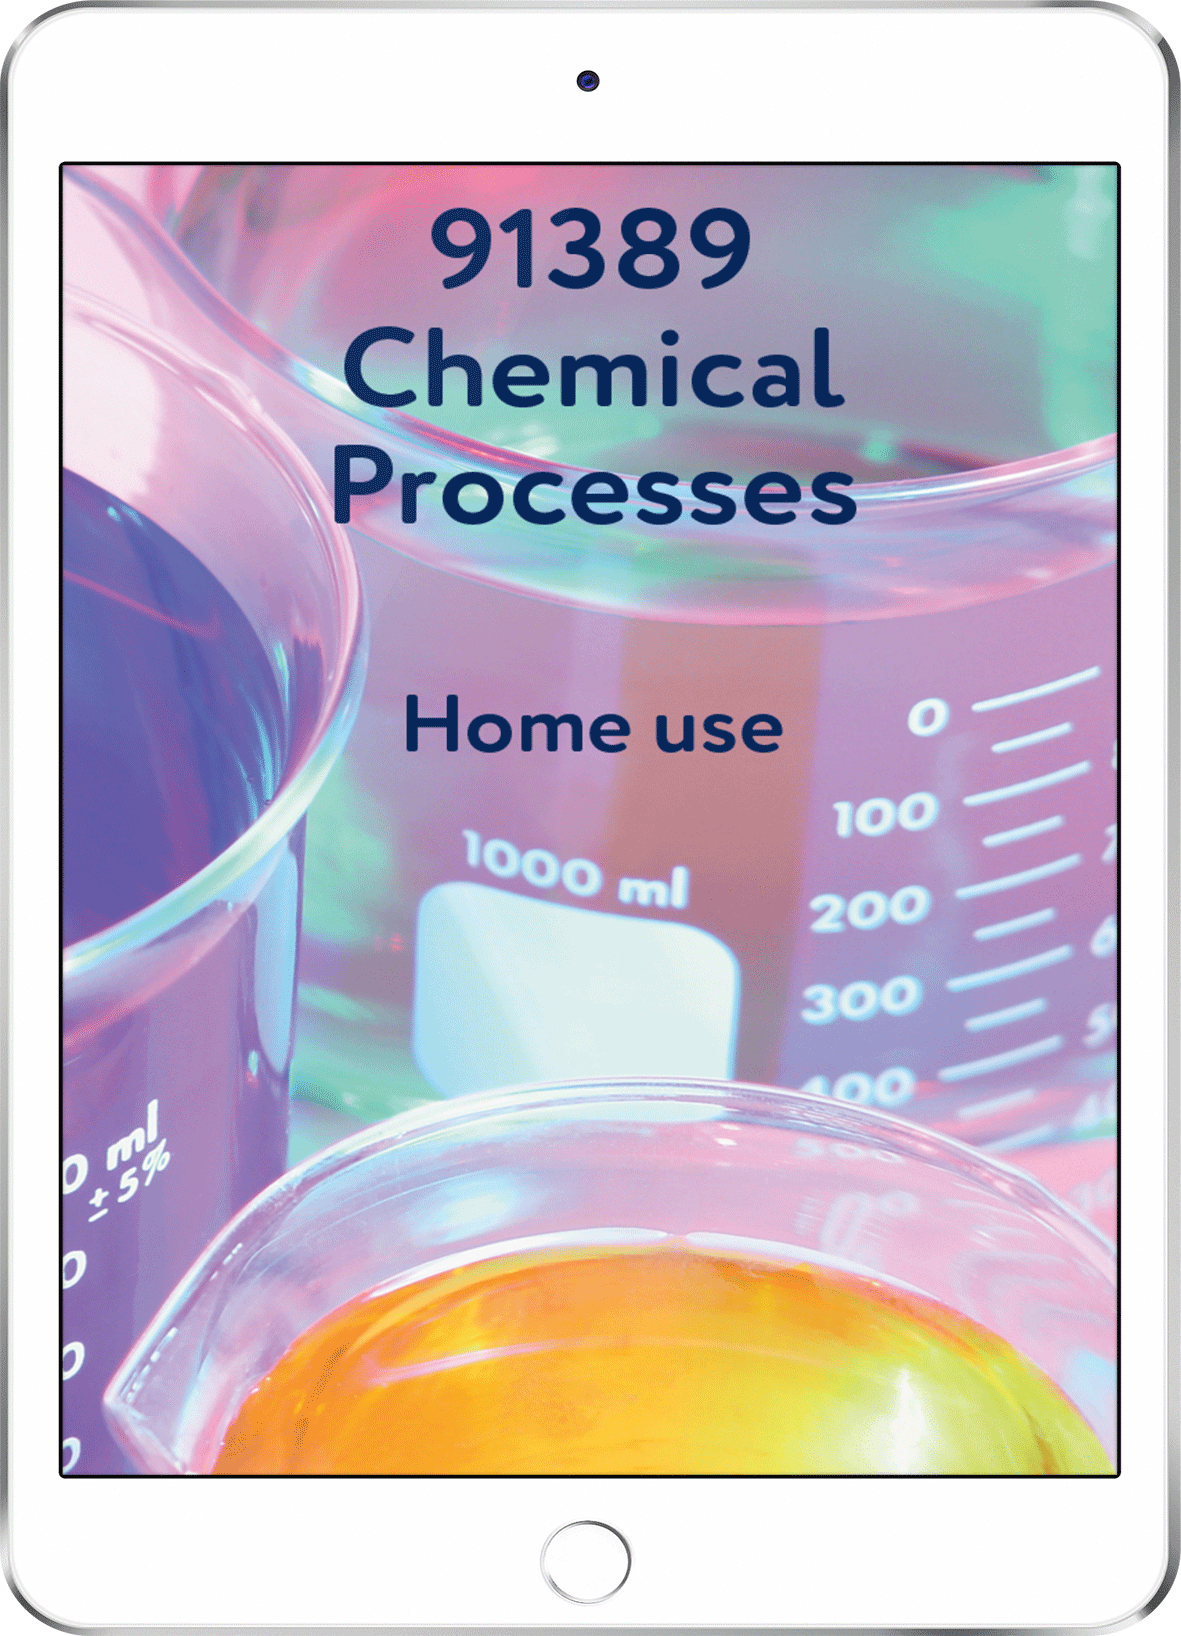 91389 Chemical Processes - Home Use